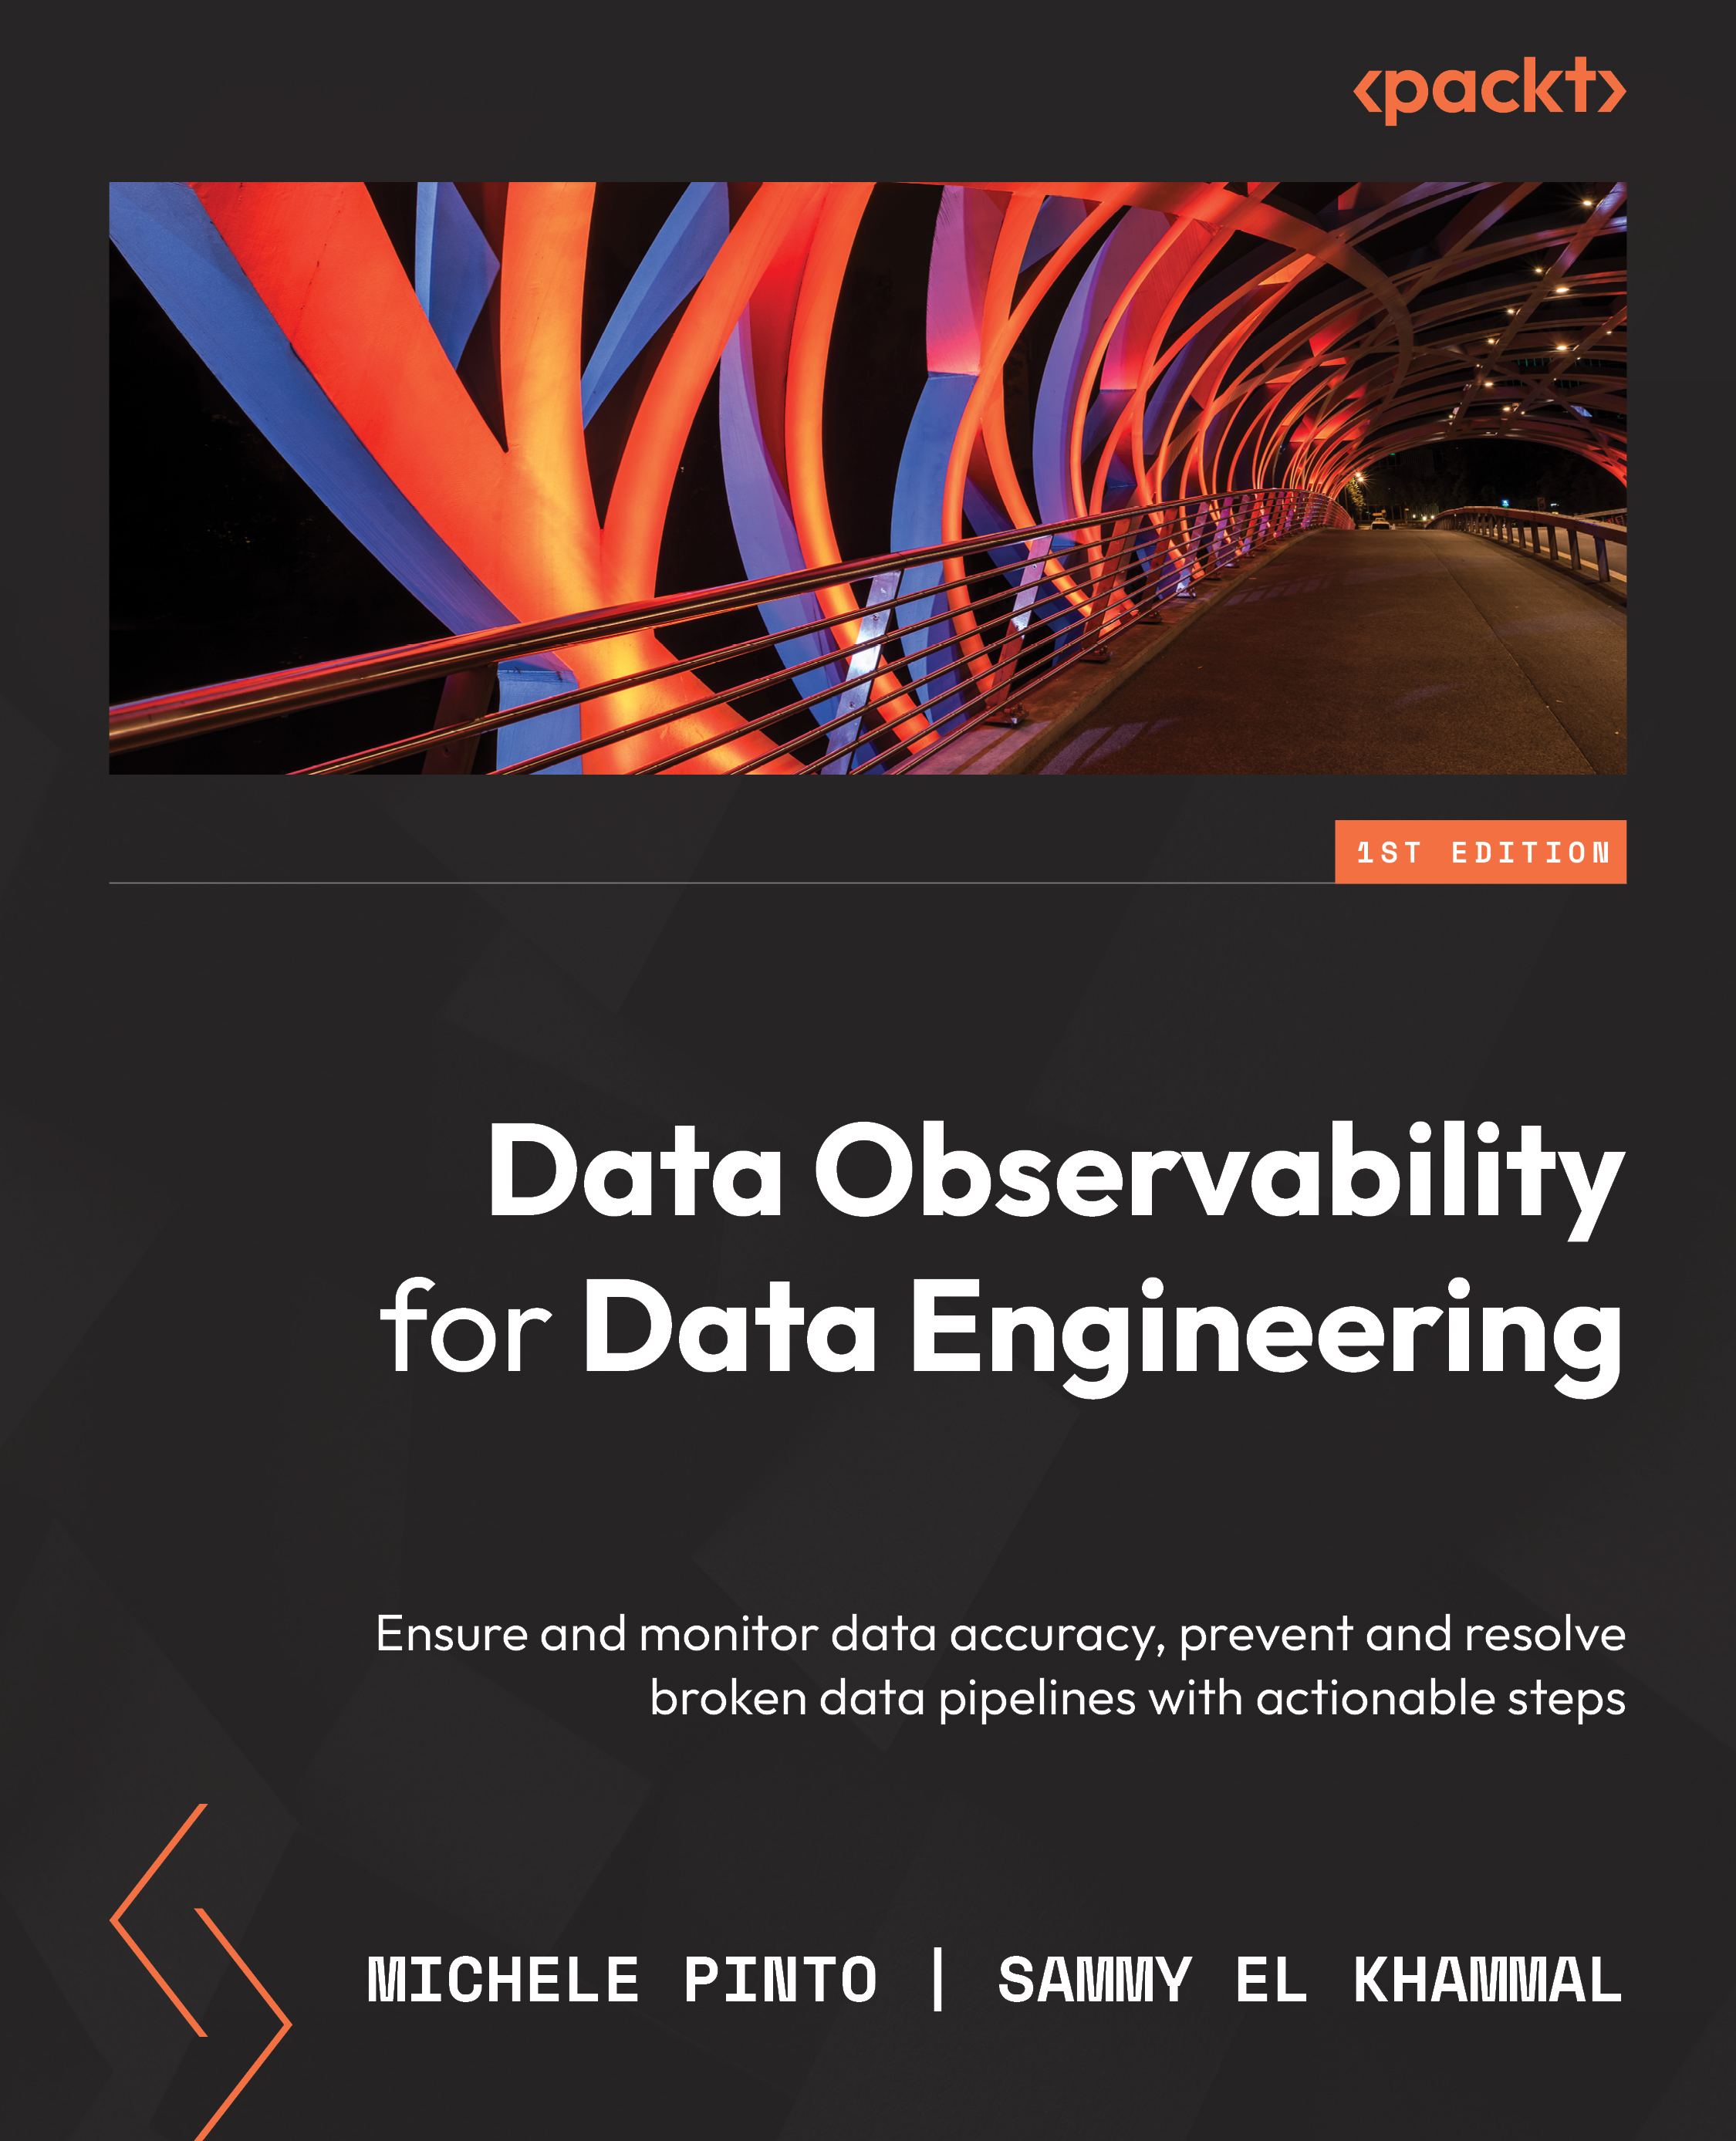 Data Observability for Data Engineering - Packt